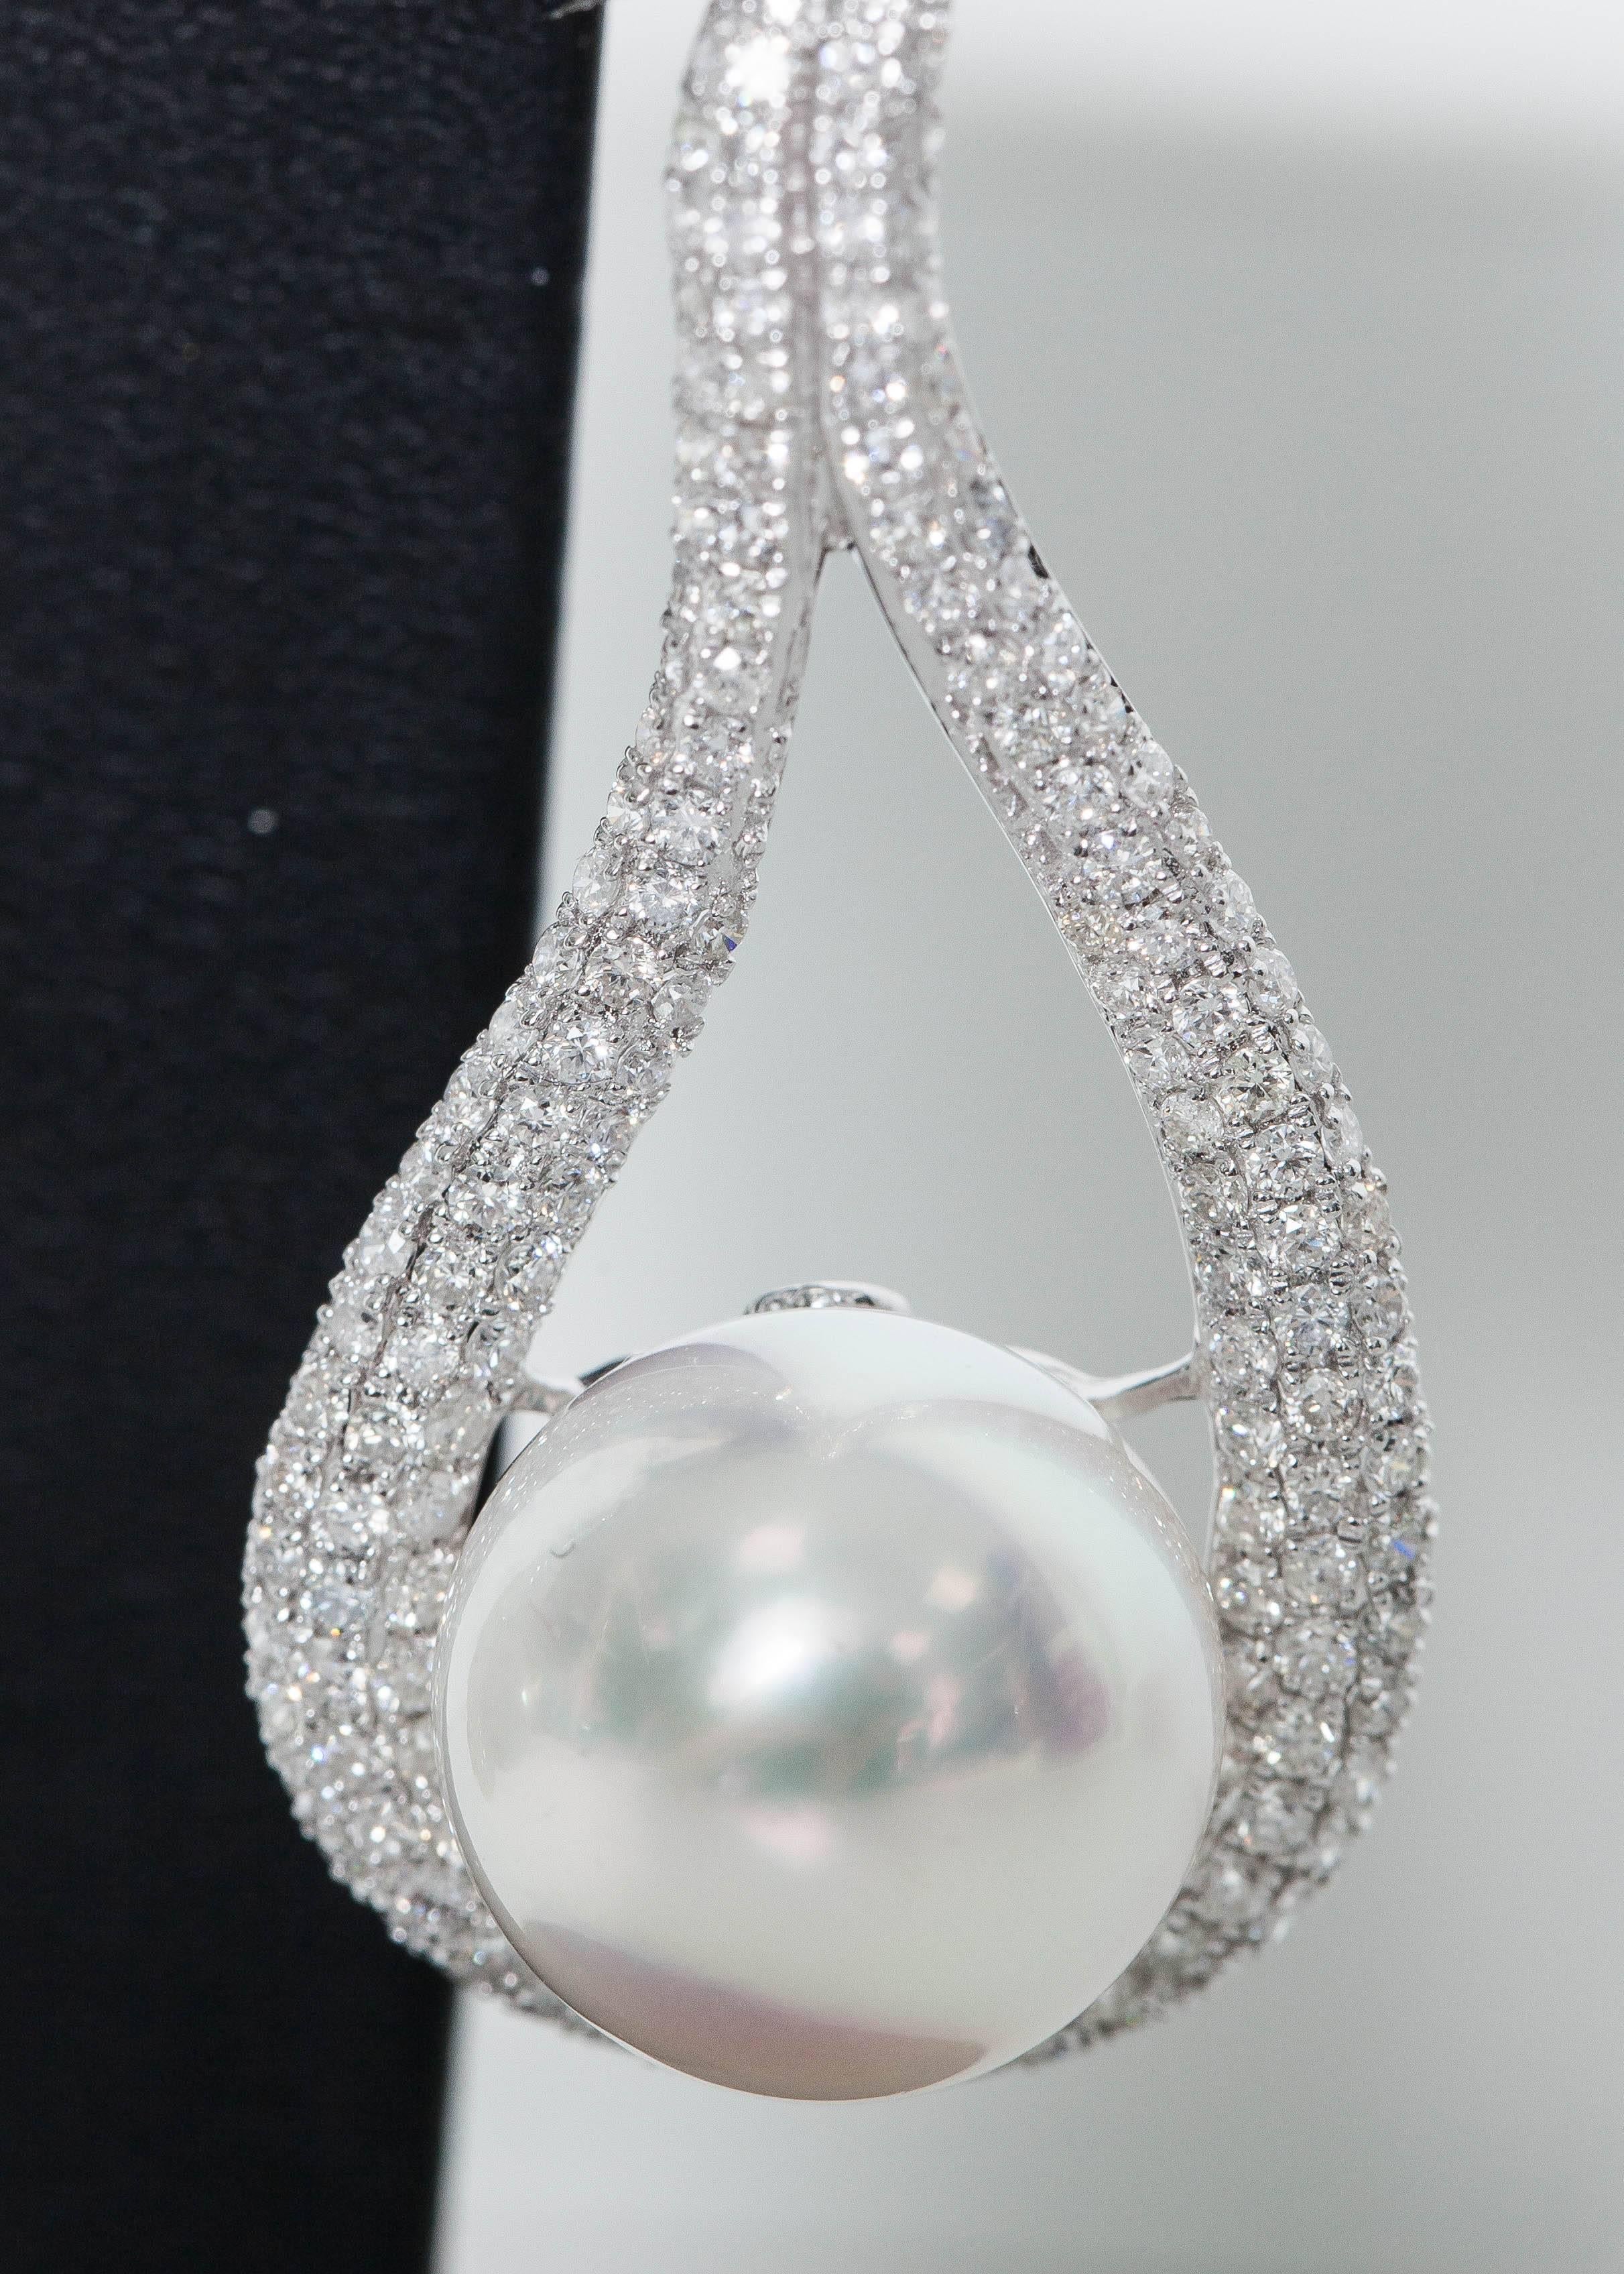 18k White Gold Earring
Pearl Size: 12mm
Pearl Quality: AAA
Pearl Luster: AAA
Total Cts. Weight: 3.45 cts.
